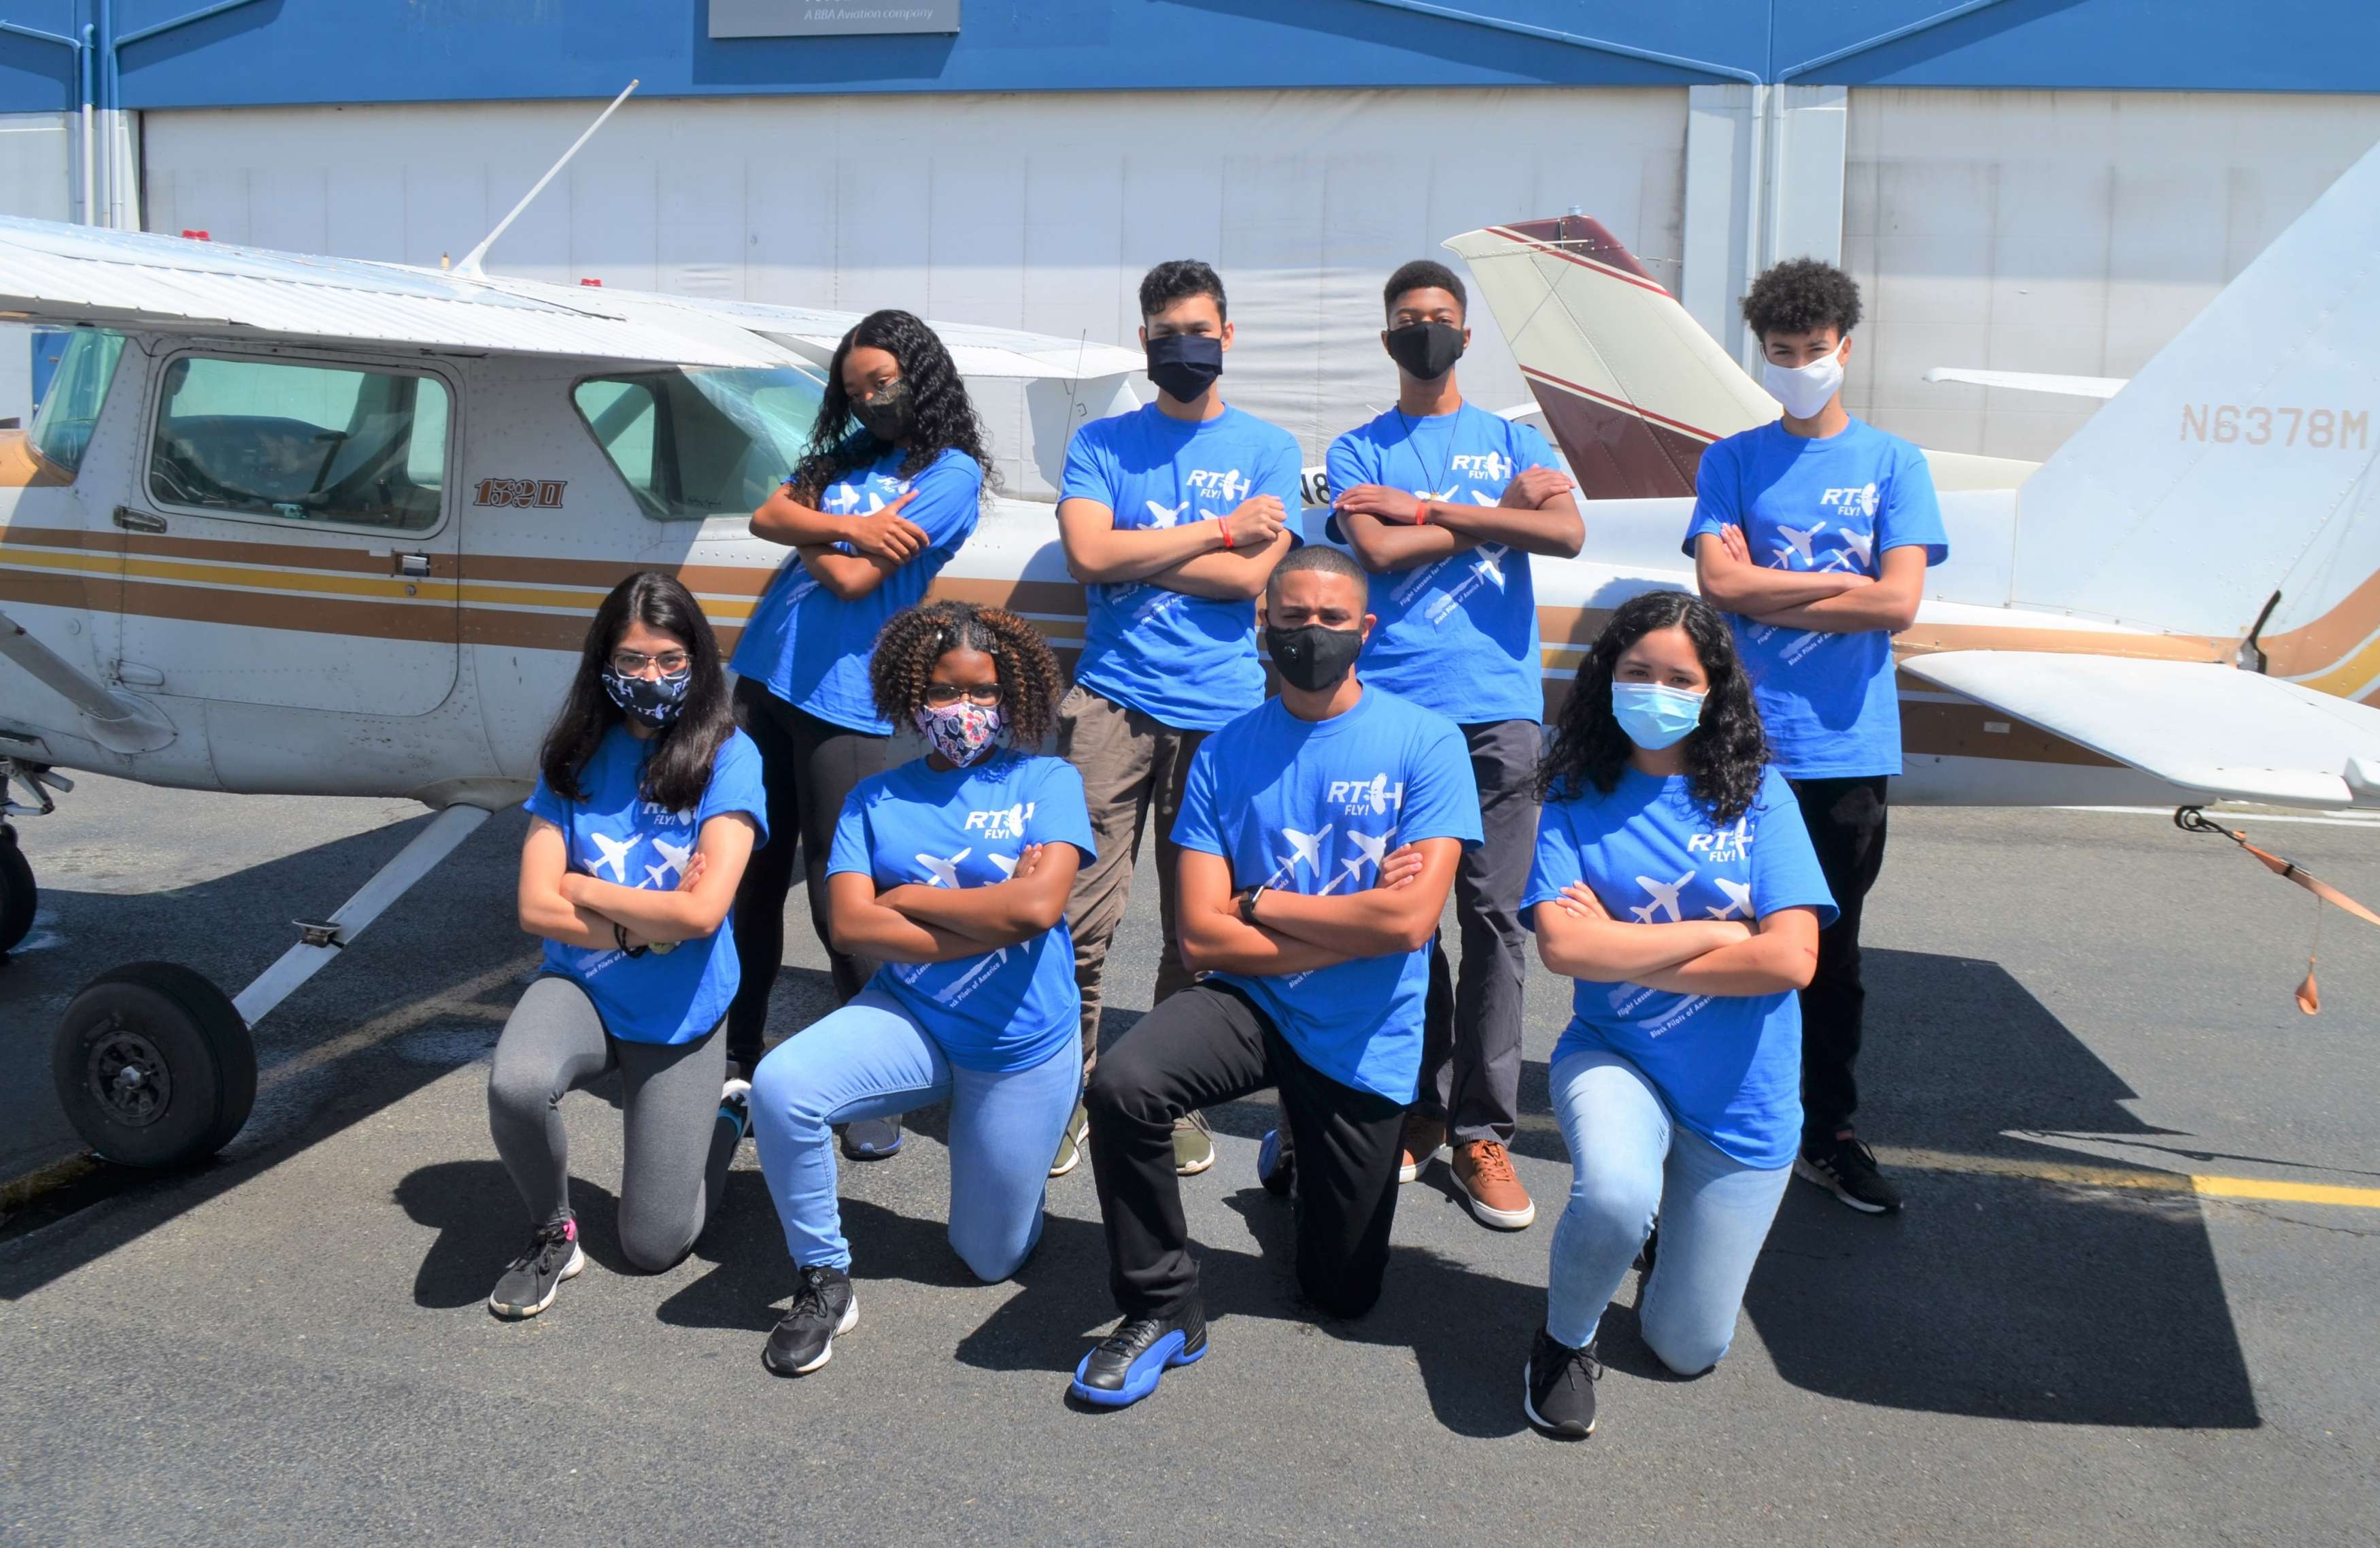 Eight youth wearing blue shirts pose in front of an airplane with their arms crossed